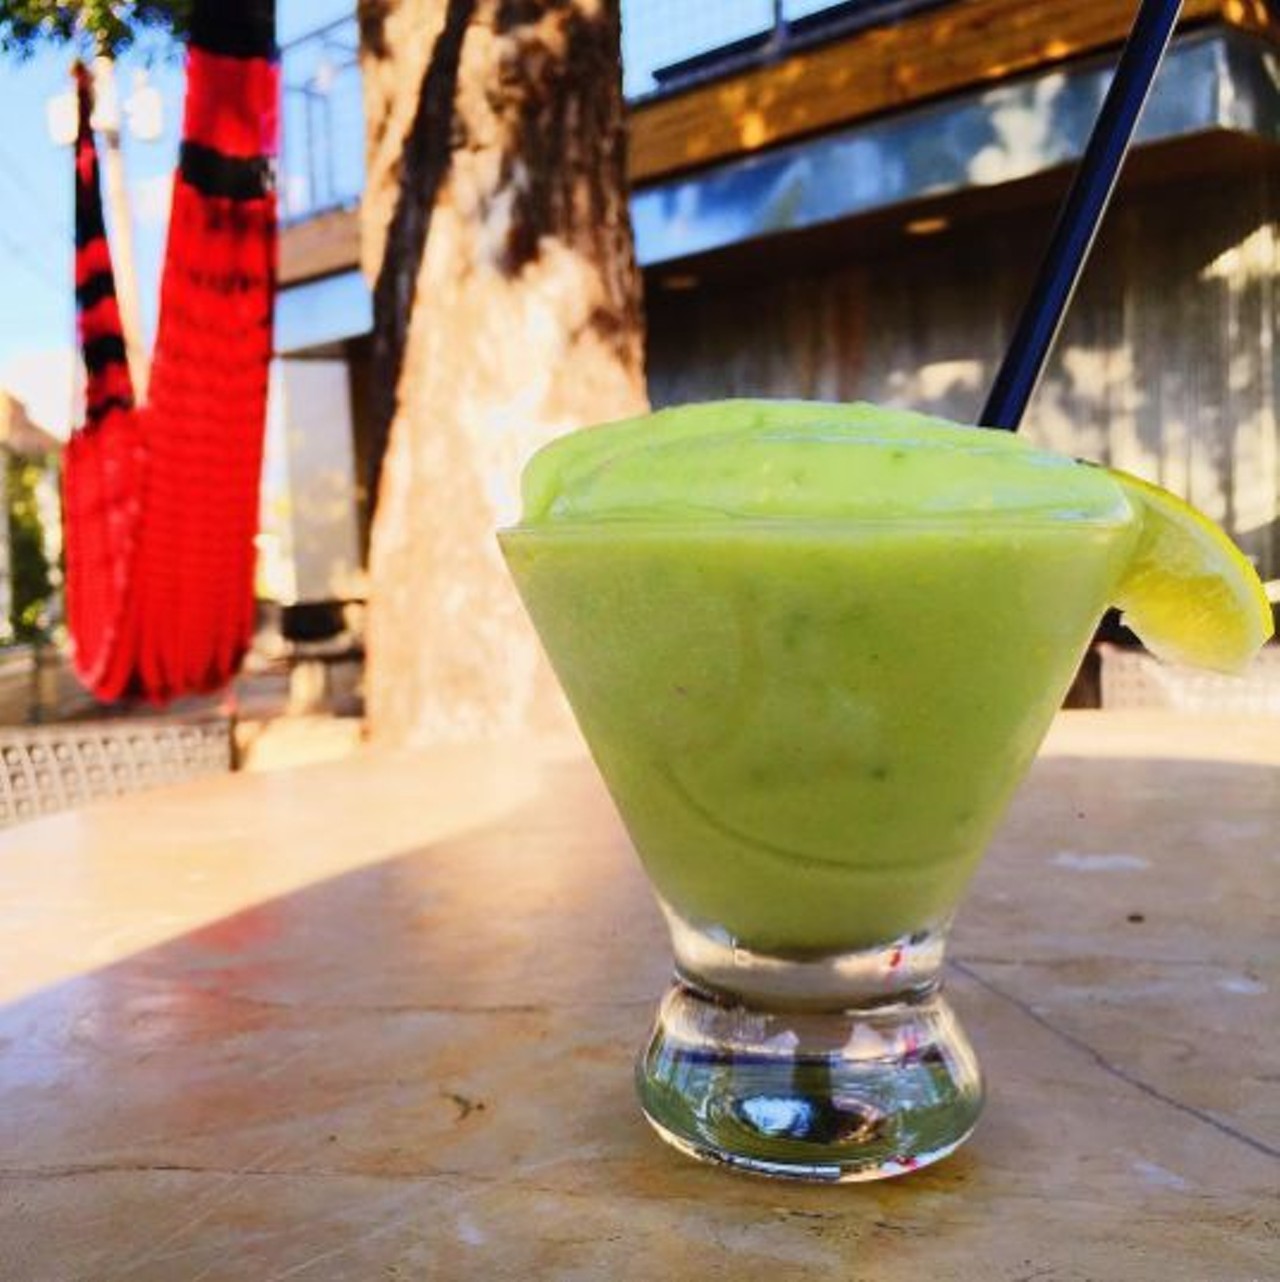 Sancho's
628 Jackson St, (210) 320-1840 
Sip on a frozen margarita ($3.50) while relaxing on the patio. For those that had an especially long day at work, lounge on the outdoor hammock and enjoy a specialty pomegranate margarita.
Photo via Instagram, sacurrent